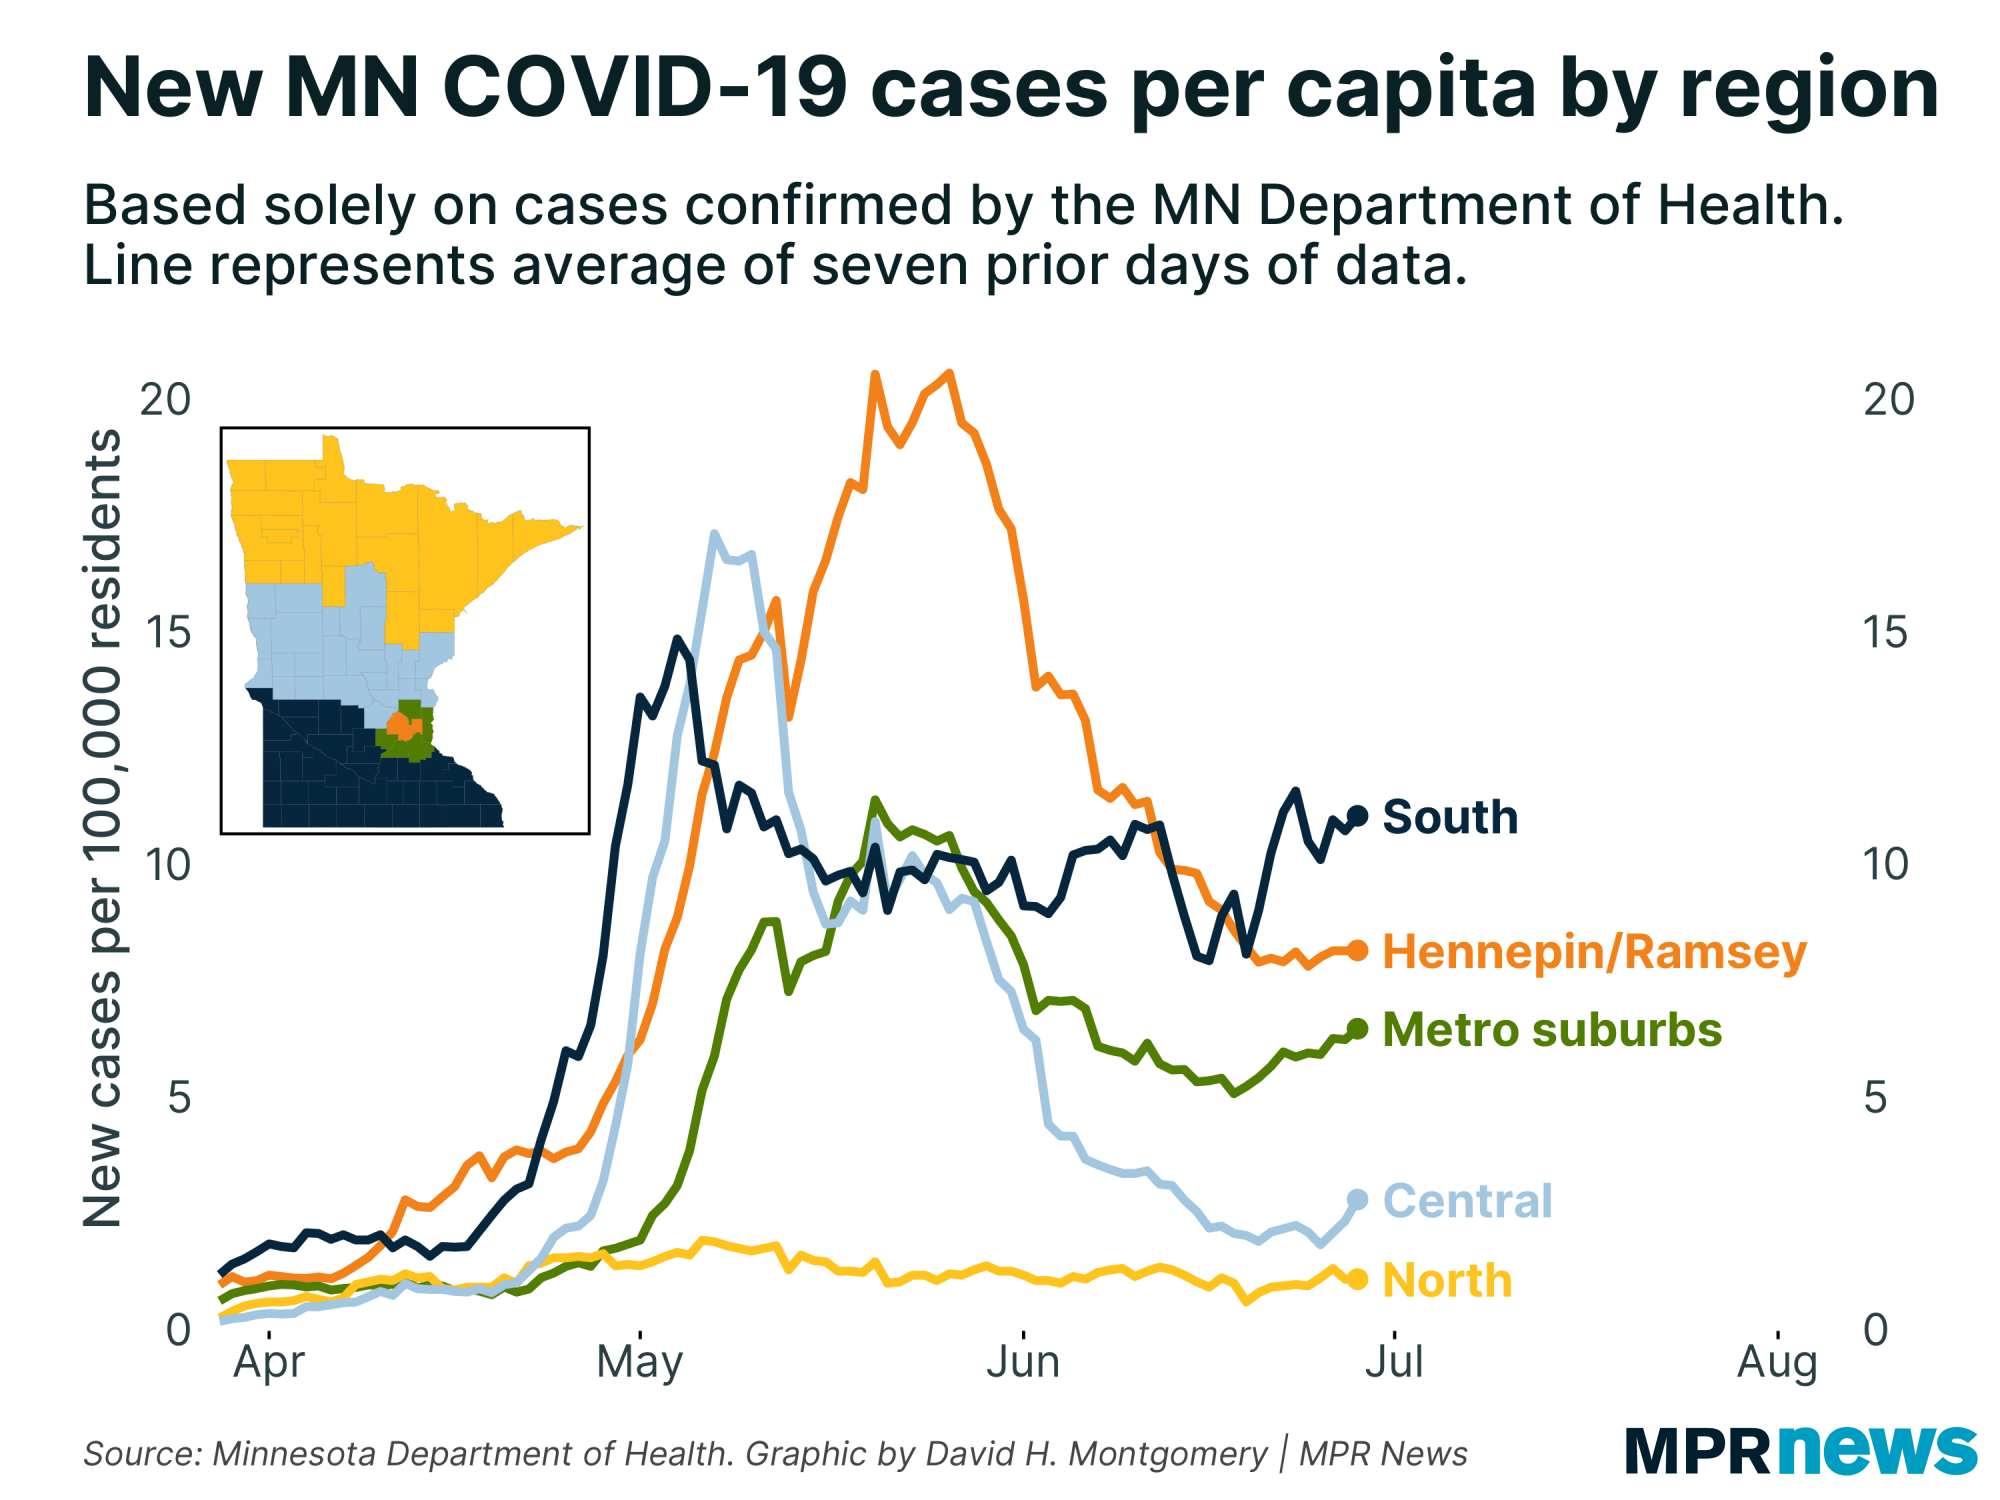 New COVID-19 cases by Minnesota region